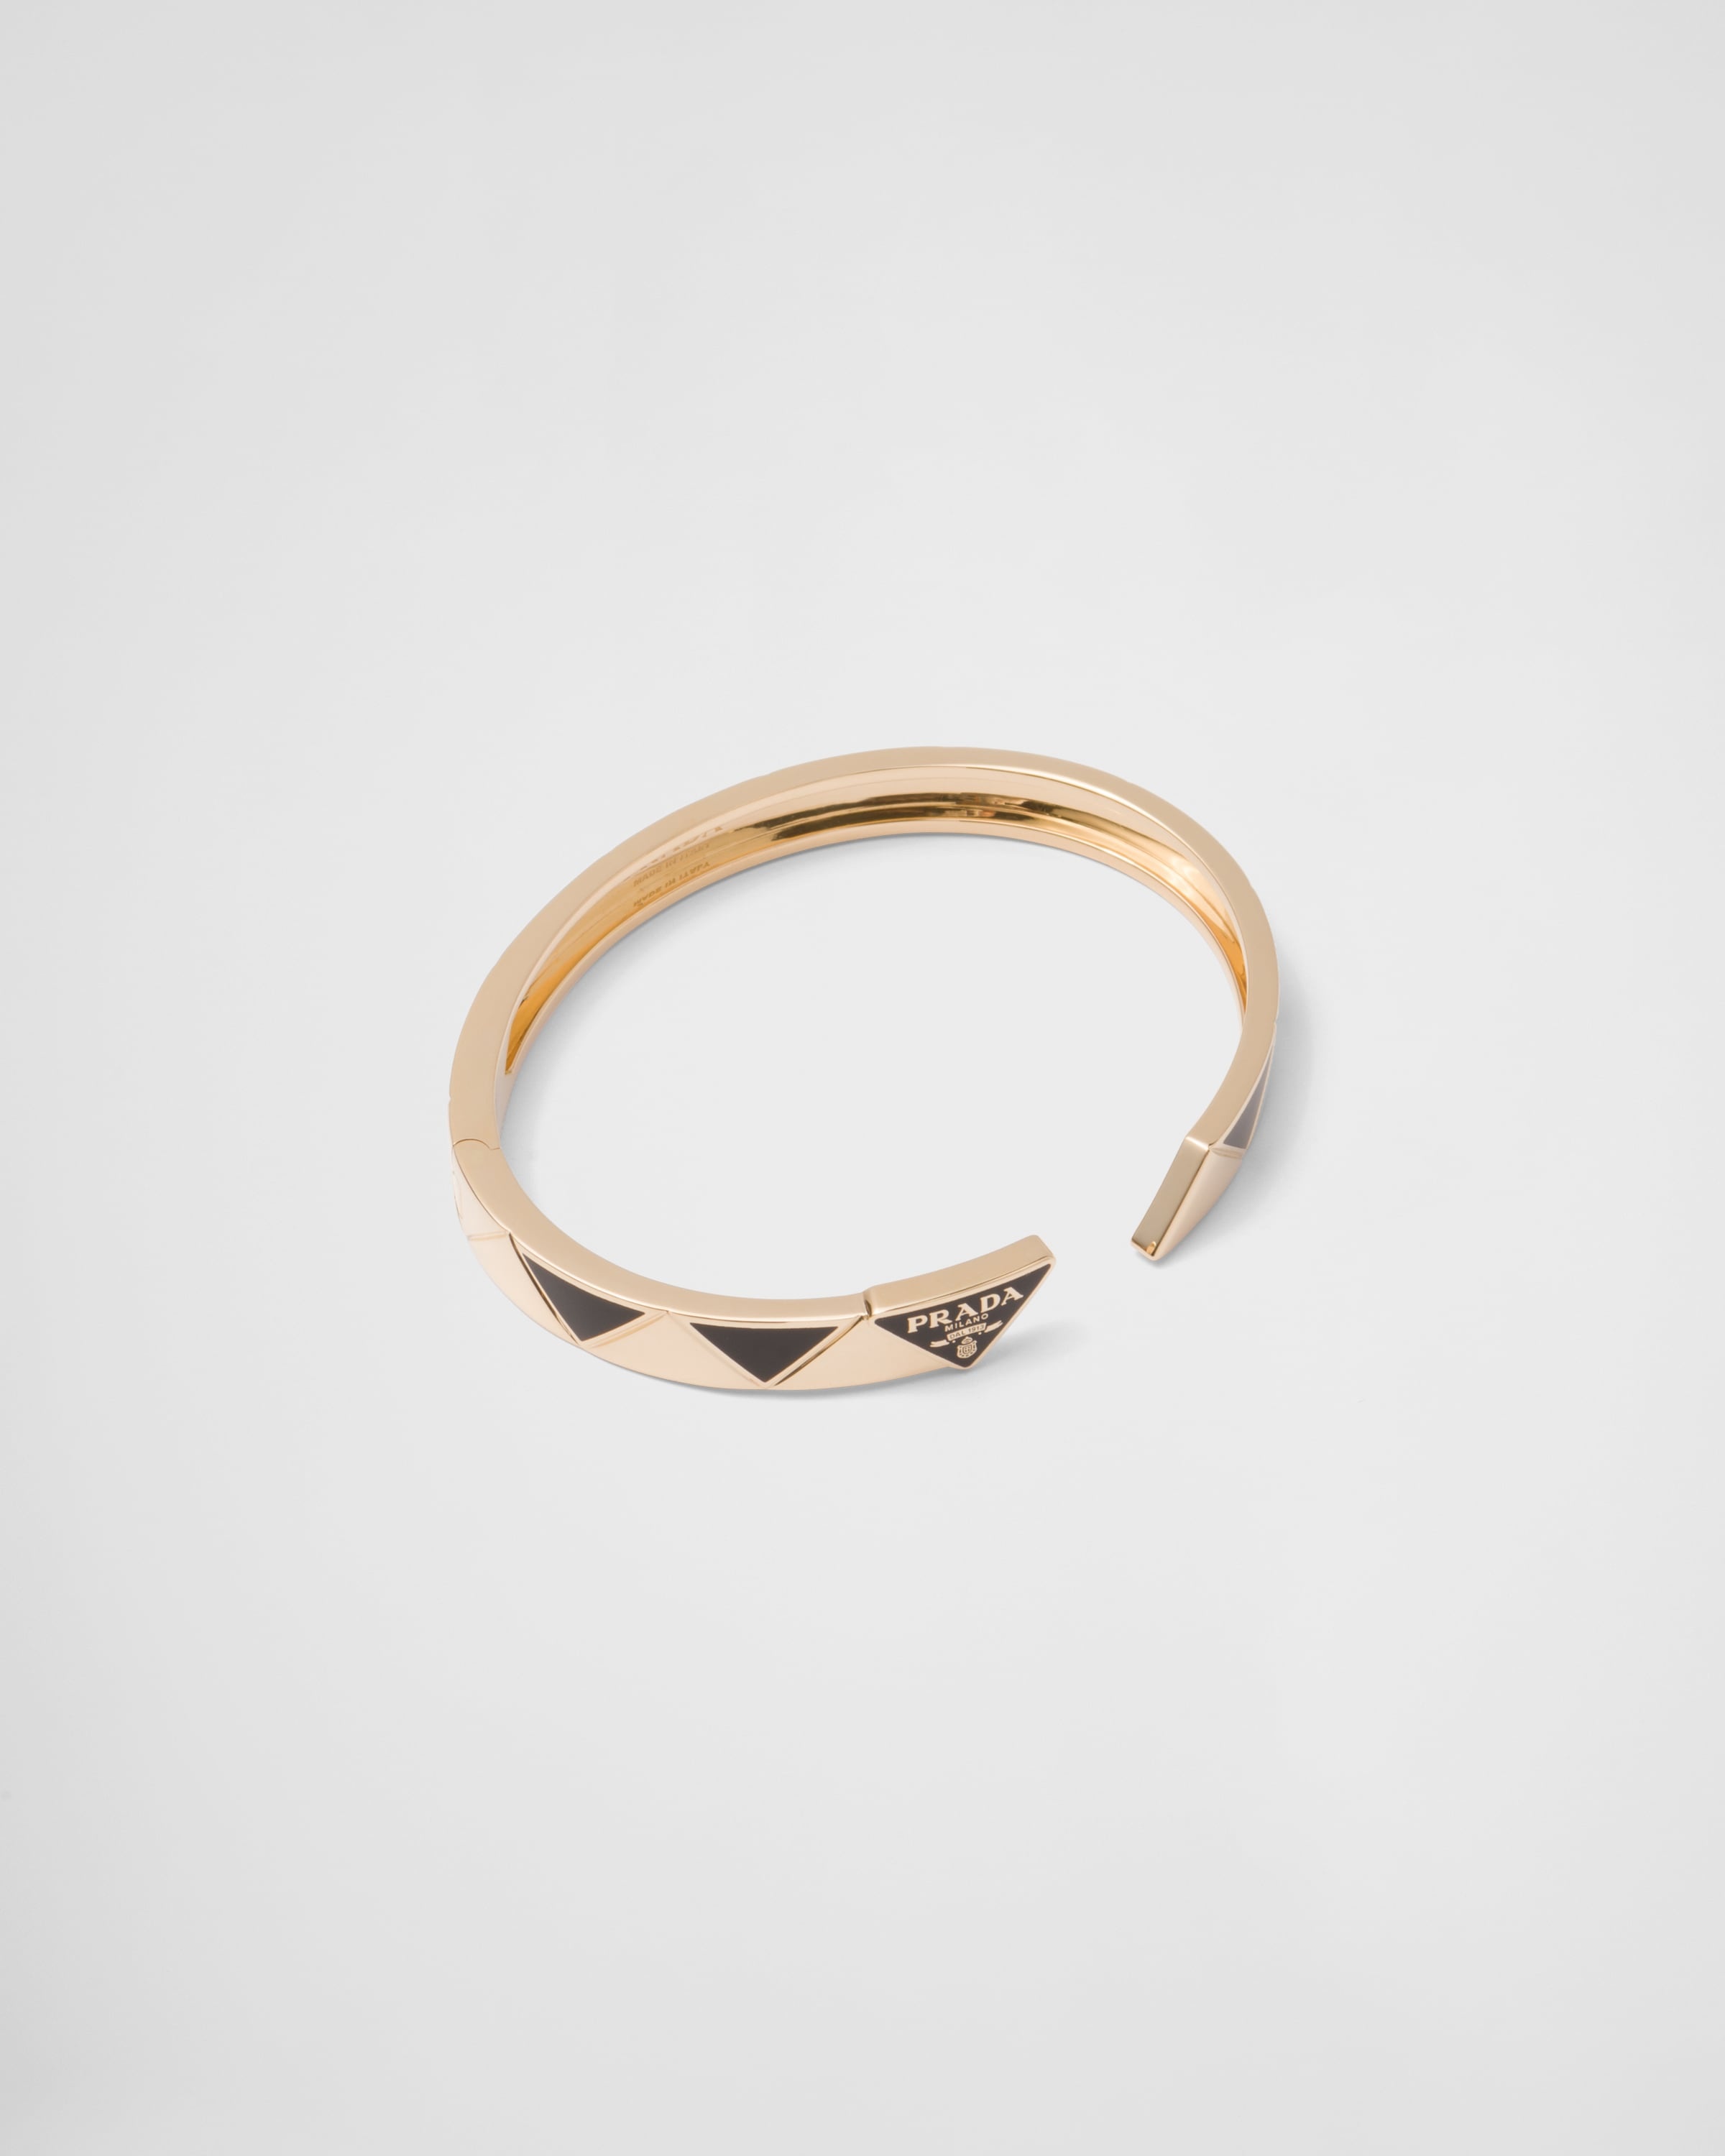 Eternal Gold bangle bracelet in yellow gold with ceramic elements - 1